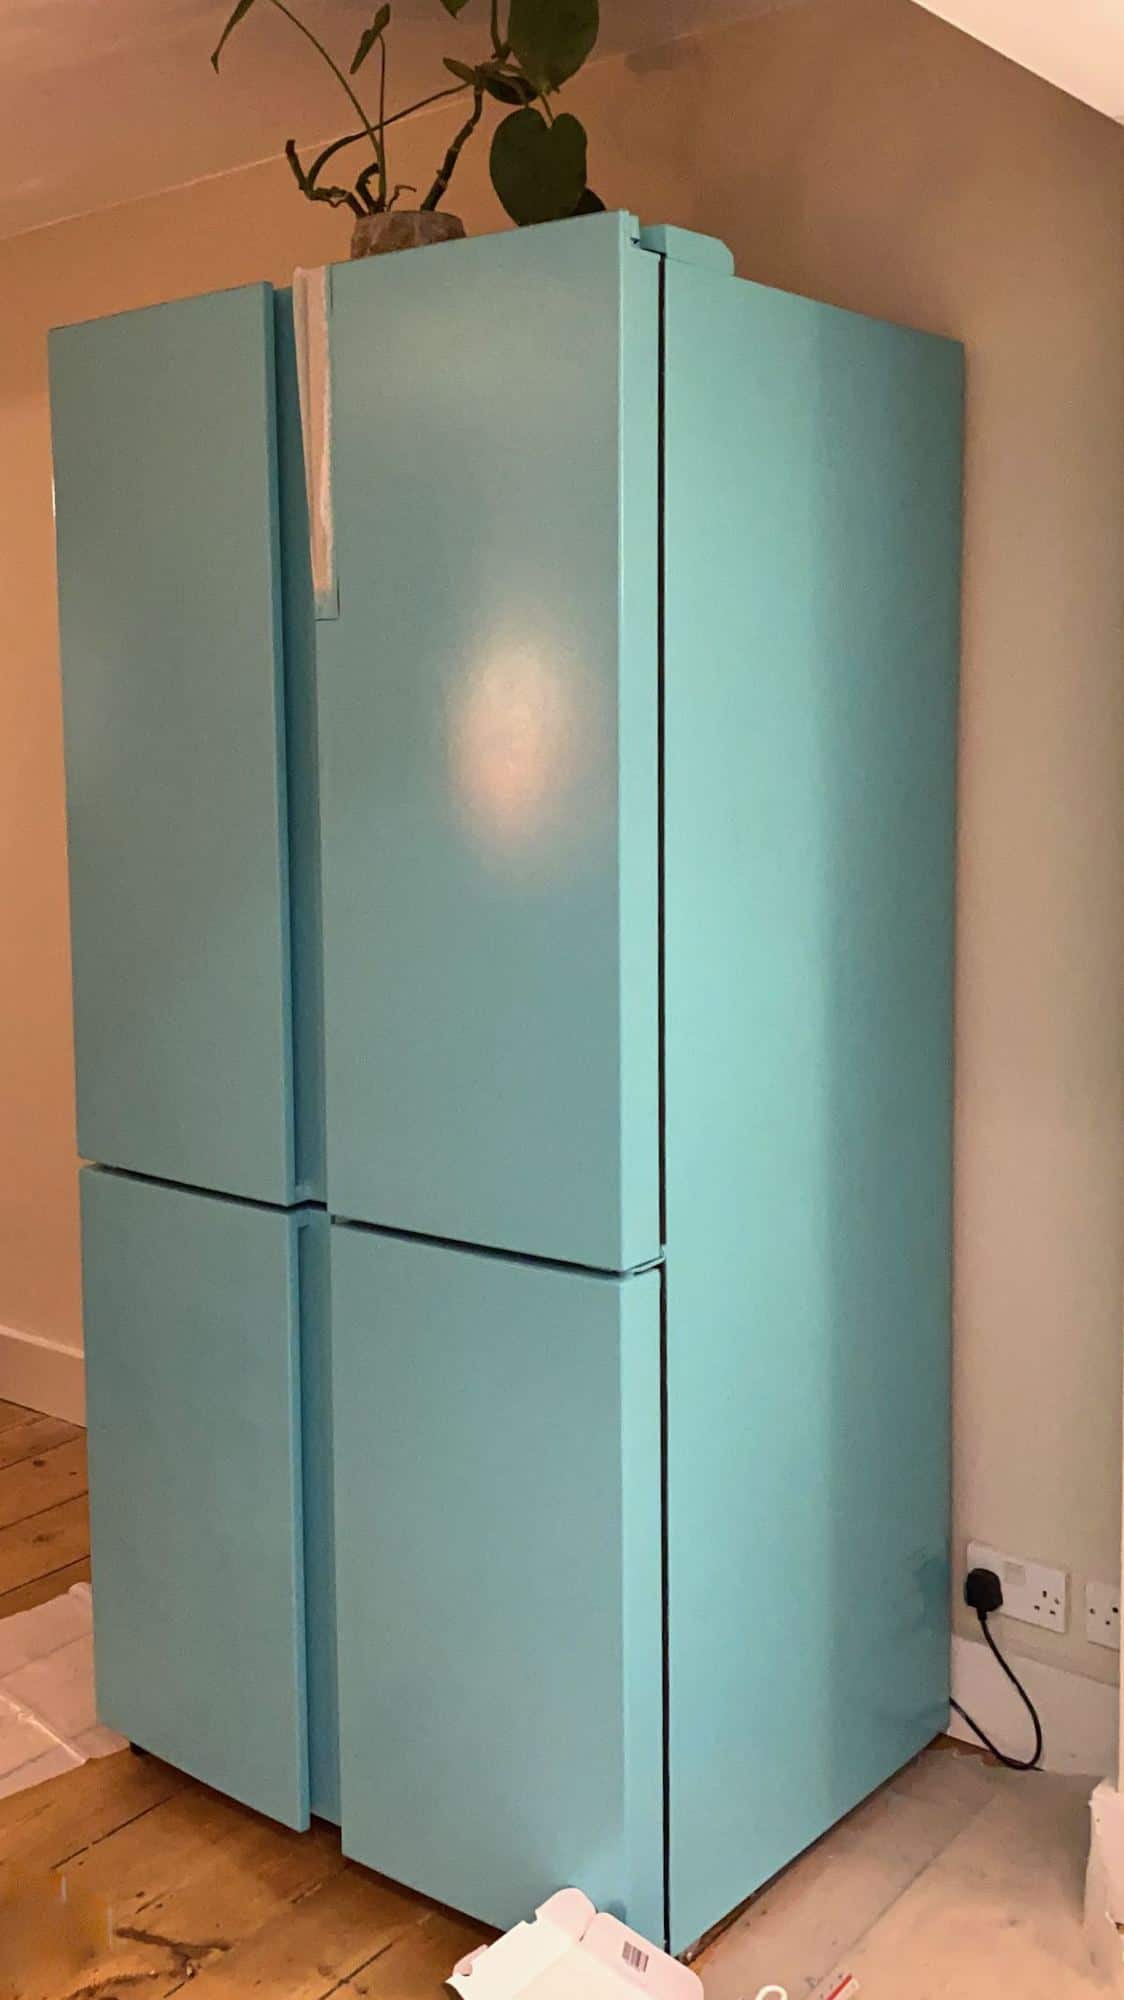 A multi-door fridge freezer freshly painted in turquoise. retro refrigerator on a budget